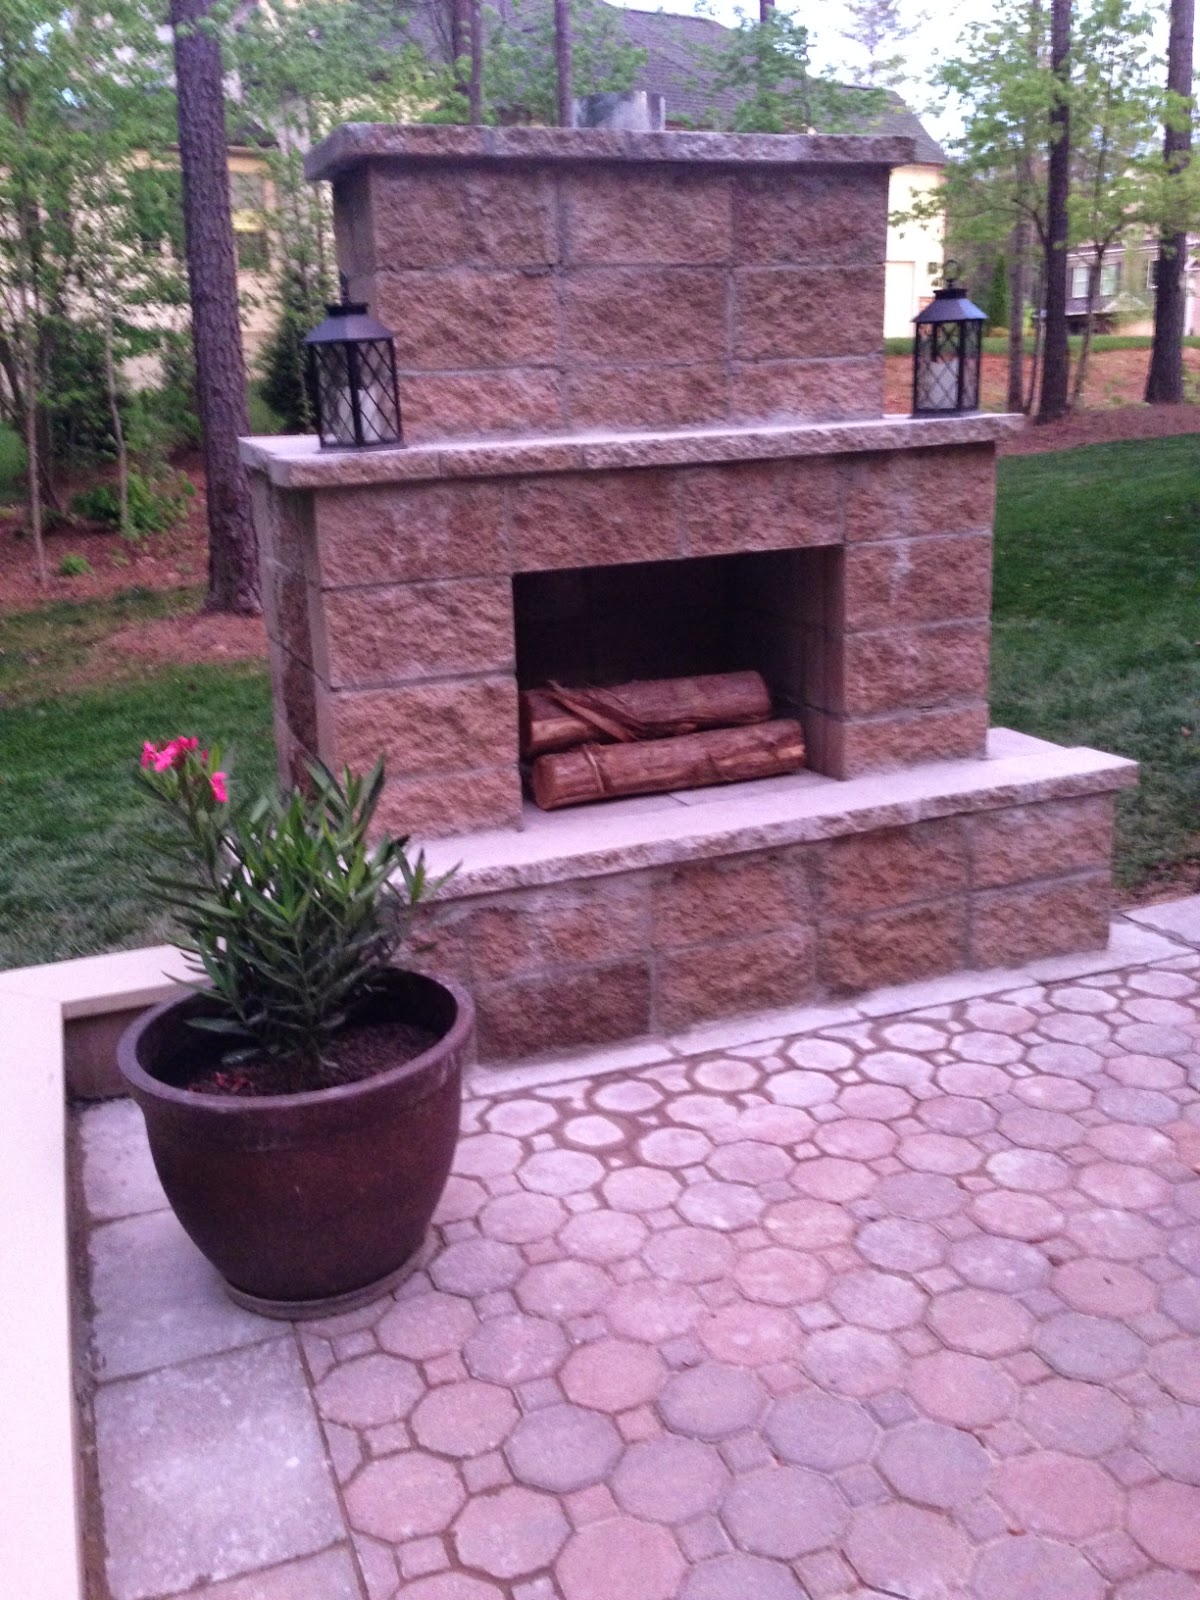 Life in the Barbie Dream House: DIY Paver Patio and Outdoor Fireplace Reveal!